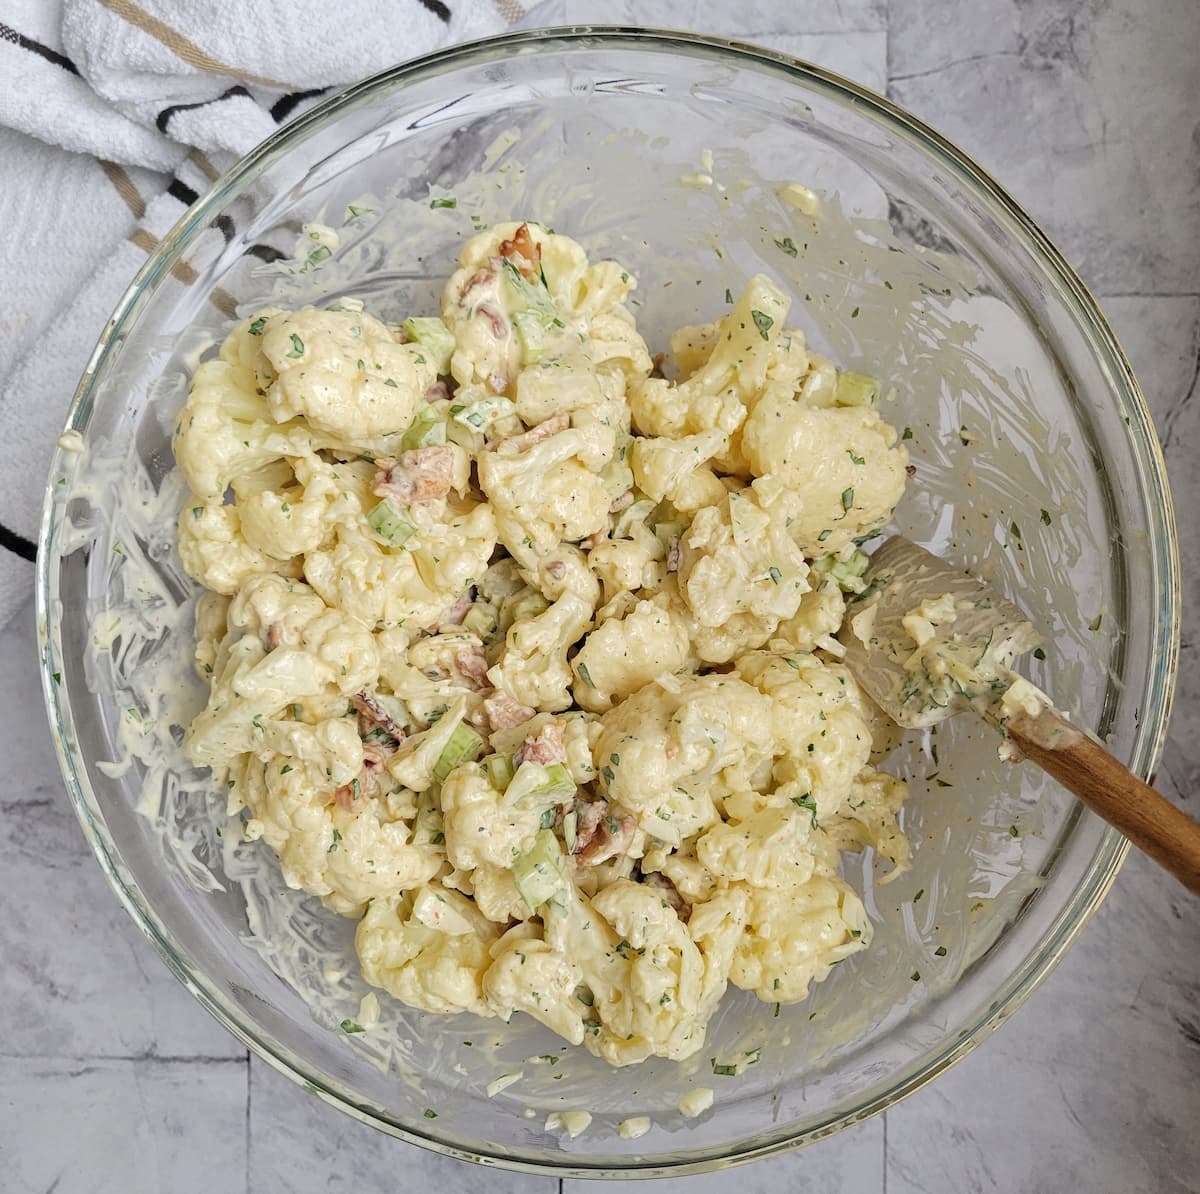 bowl of cauliflower florets mixed with a creamy sauce and chopped celery and bacon